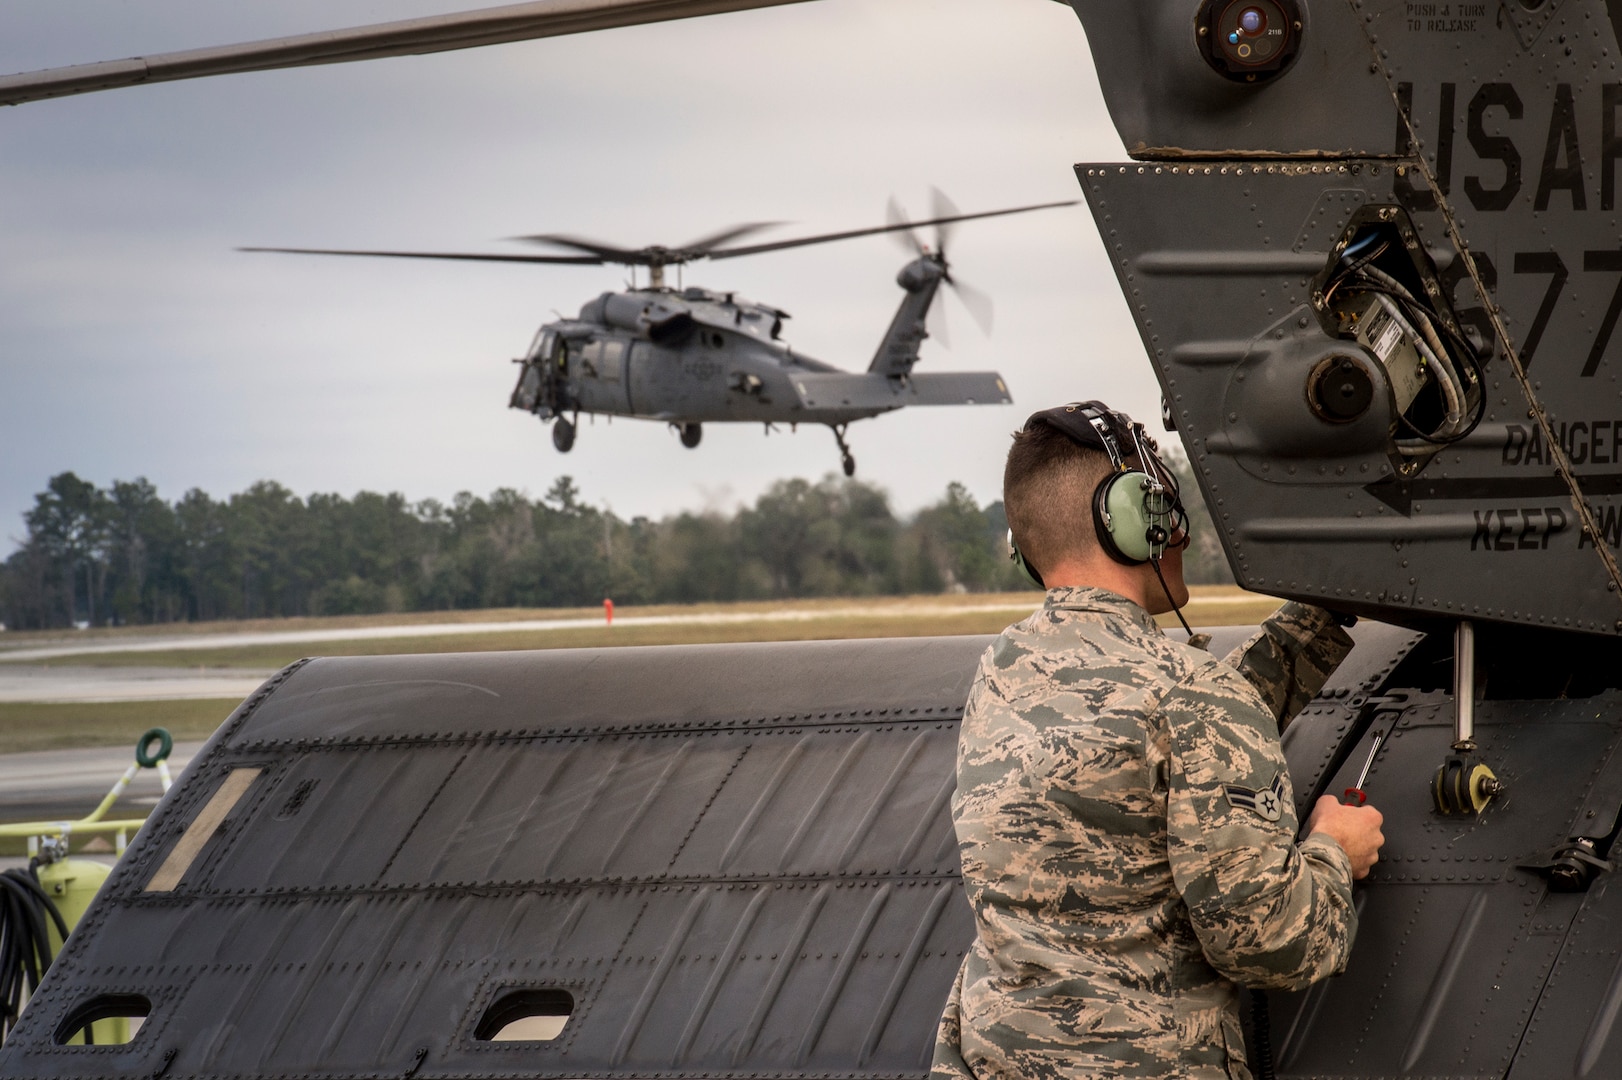 An Airman from the 41st Helicopter Maintenance Unit attaches a panel to the tail of an HH-60G Pave Hawk, Jan. 7, 2016, at Moody Air Force Base, Ga. The 41st HMU works 24/7 to ensure aircraft are ready to fly at a moment’s notice. (U.S. Air Force photo by Senior Airman Ryan Callaghan/Released)

